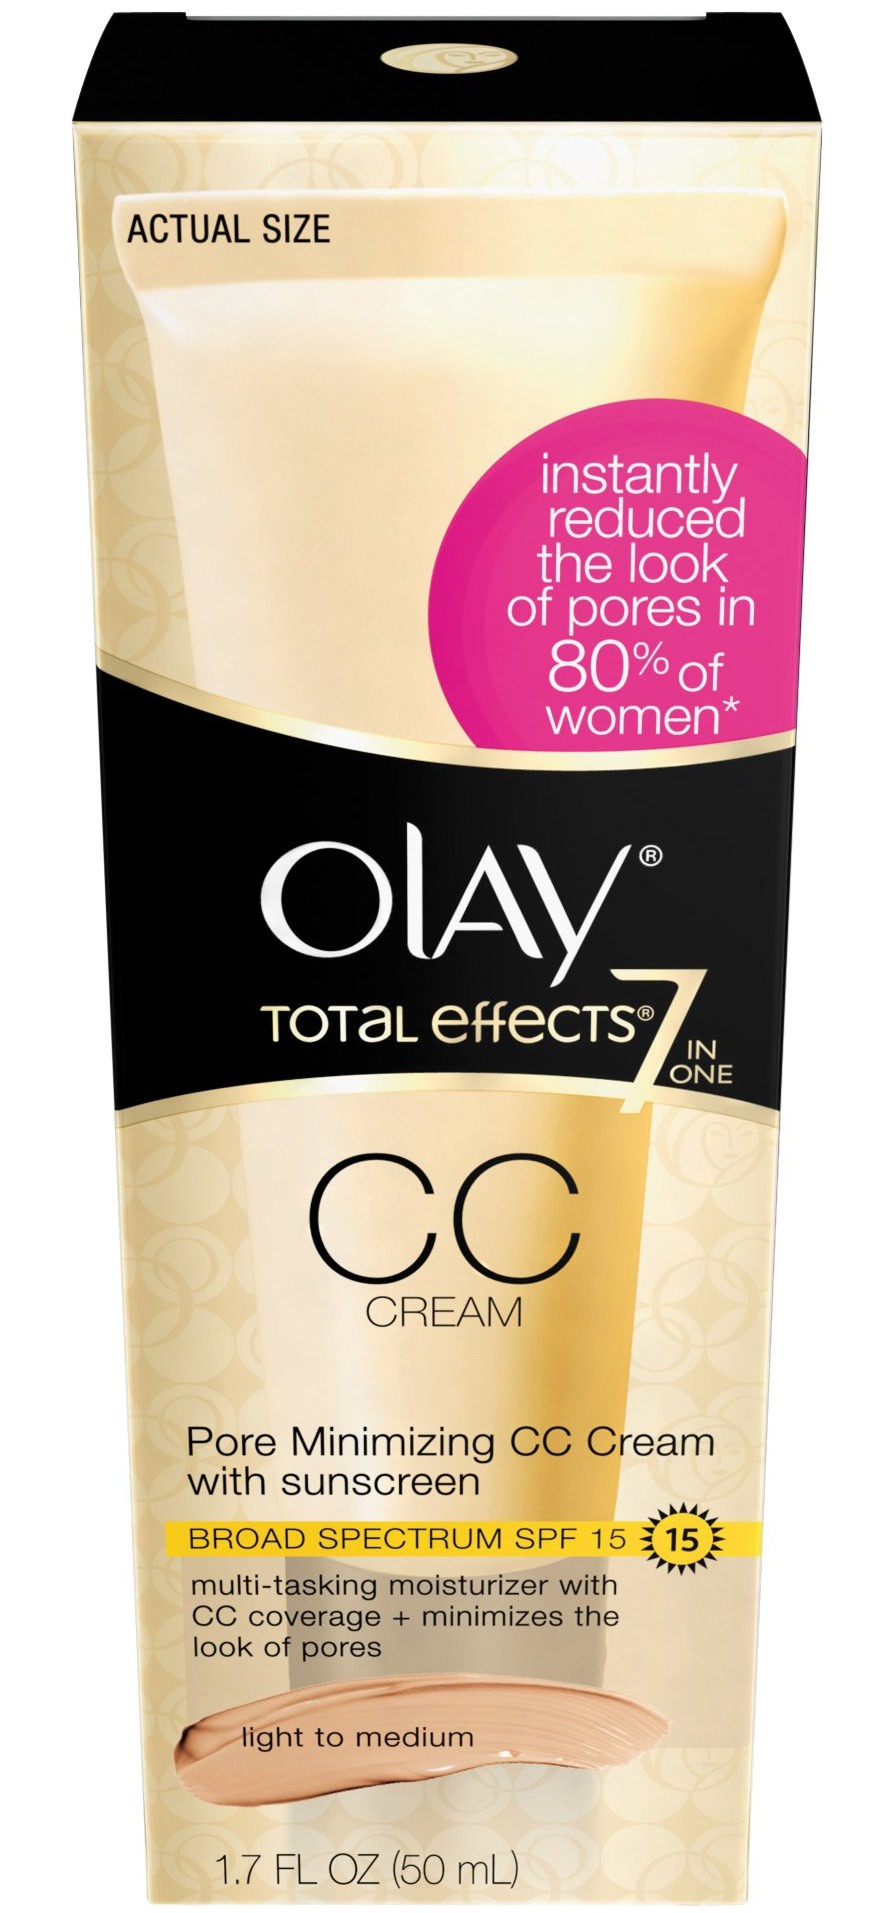 Olay Total Effects 7 In One CC Cream Pore Minimizing CC Cream With Sunscreen